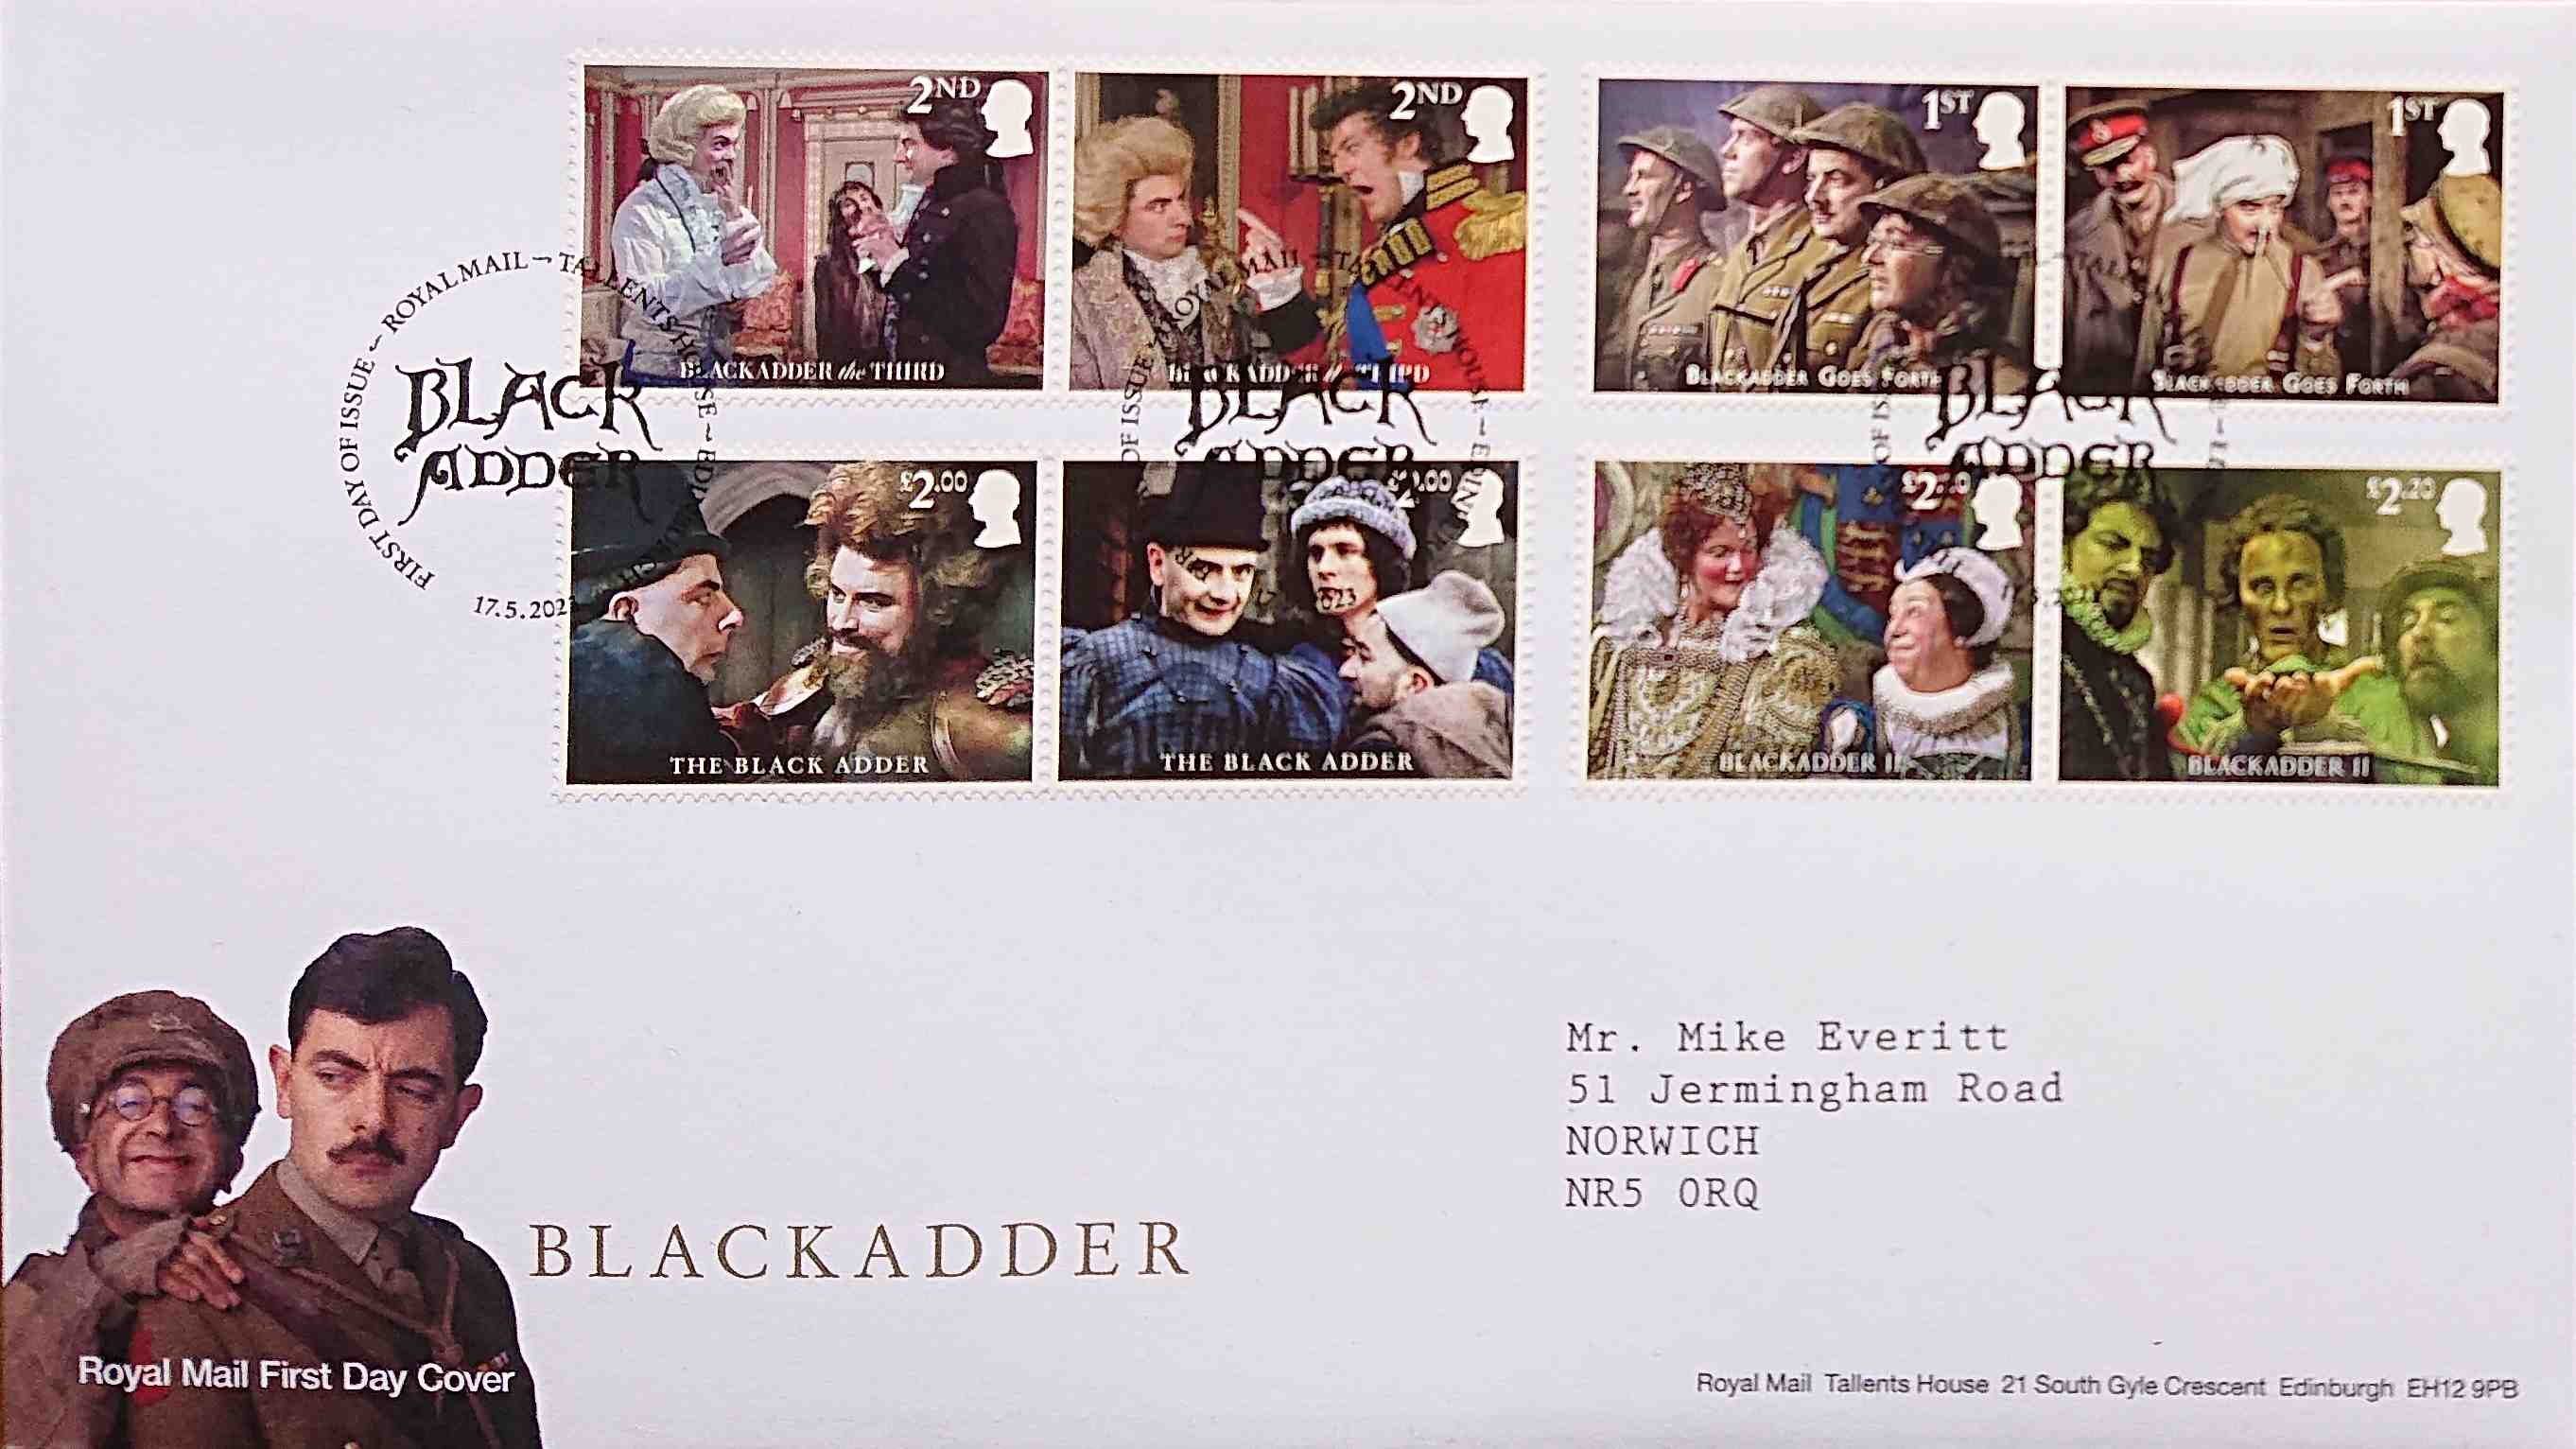 Picture of Black Adder - Royal Mail first day cover by artist Tom Huddleston from the BBC anything_else - Records and Tapes library